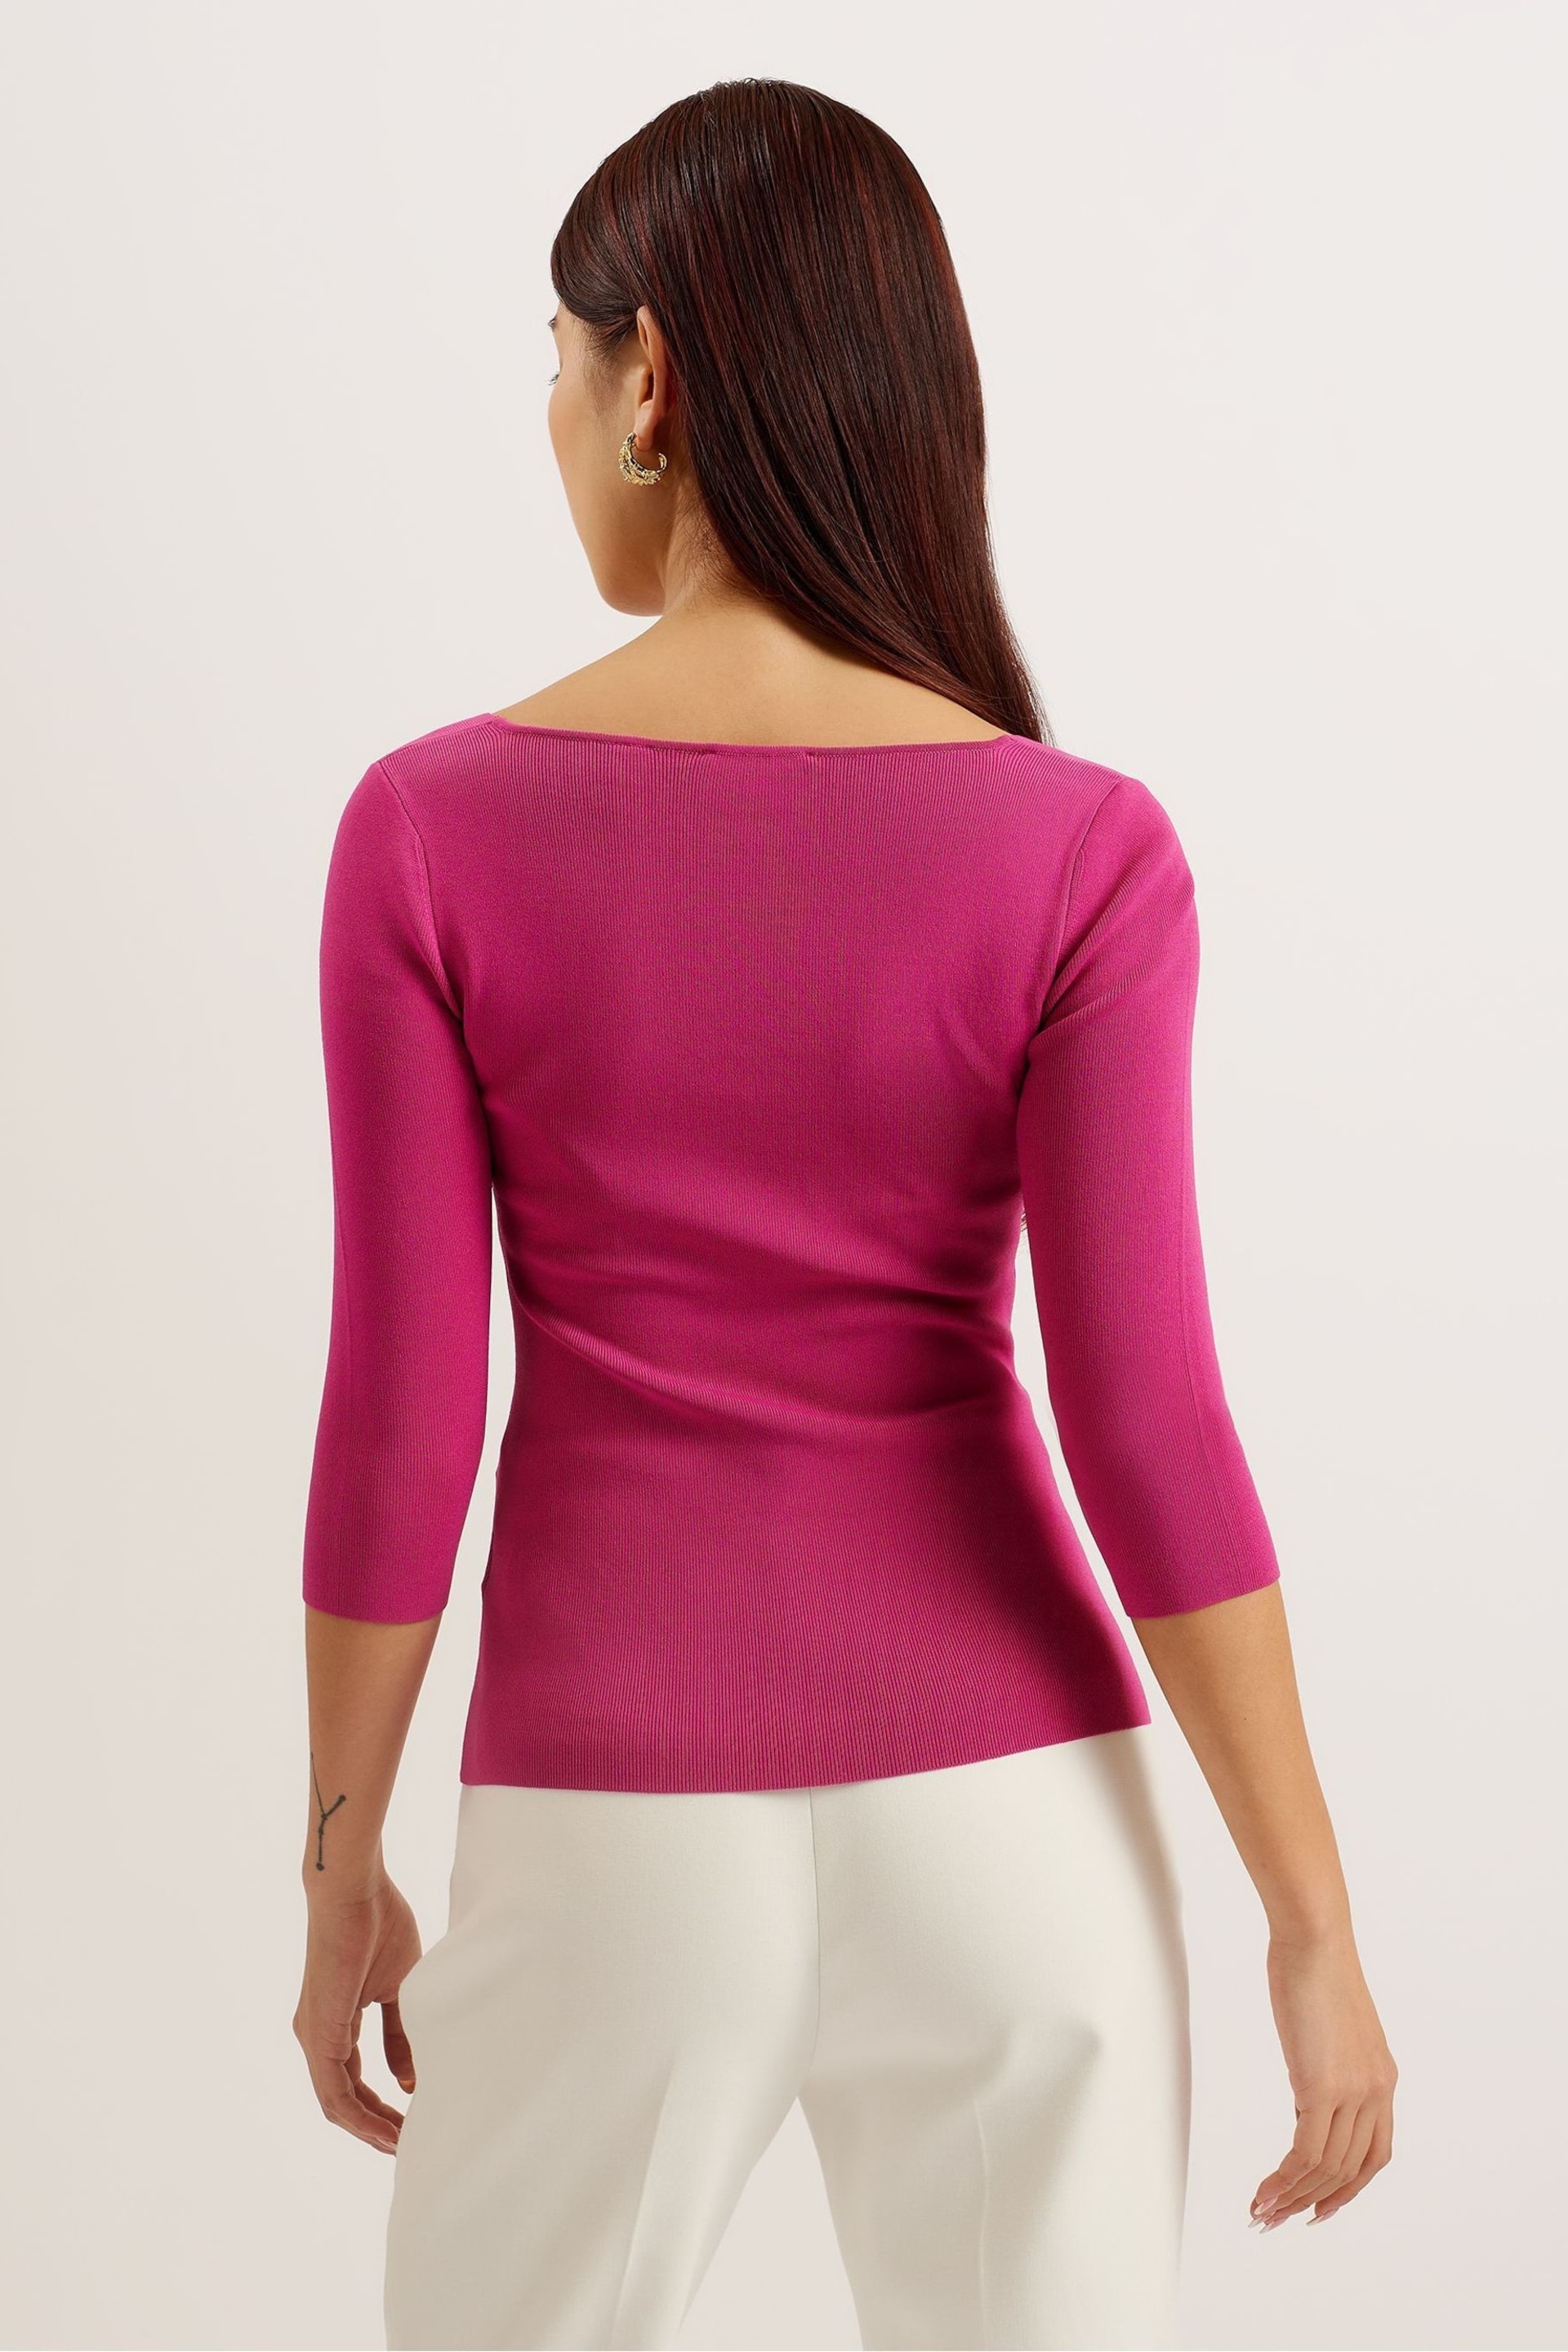 Ted Baker Pink T-Shirt - Image 5 of 6